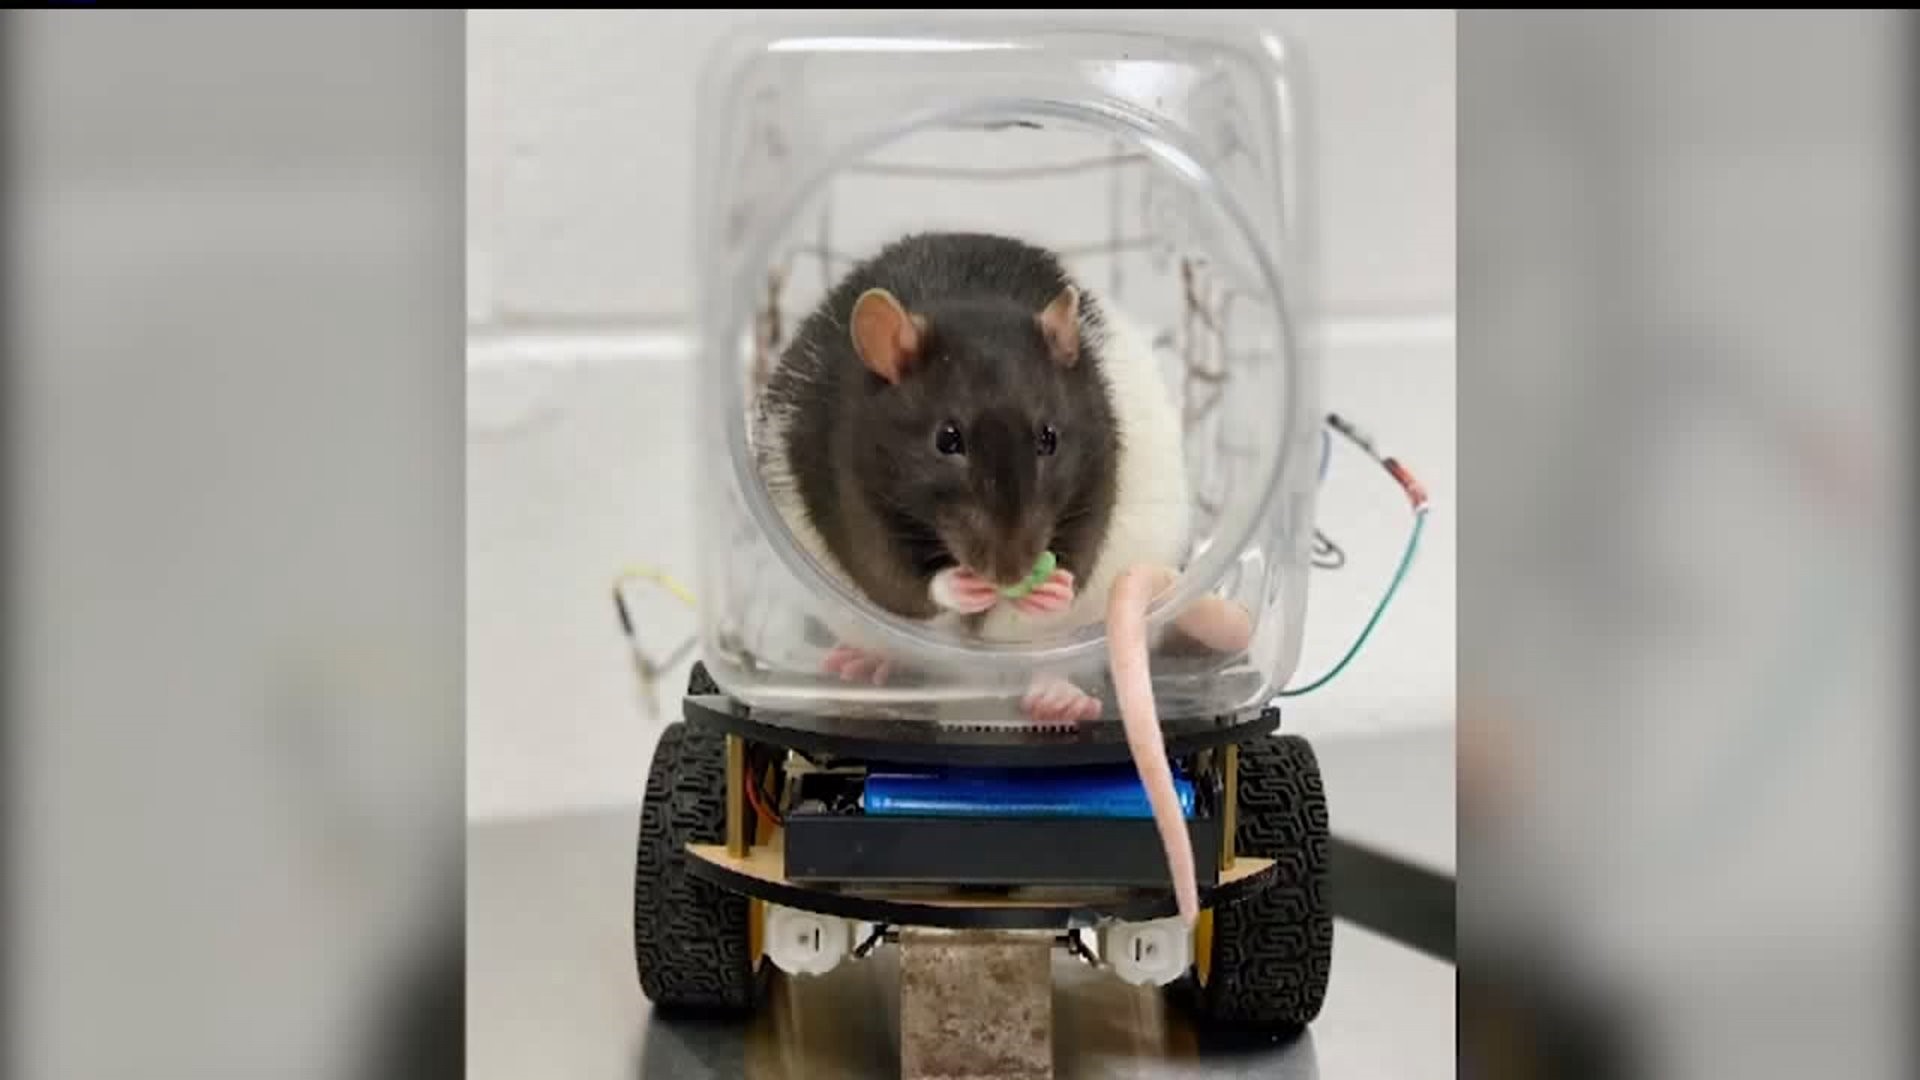 Rats learned how to drive